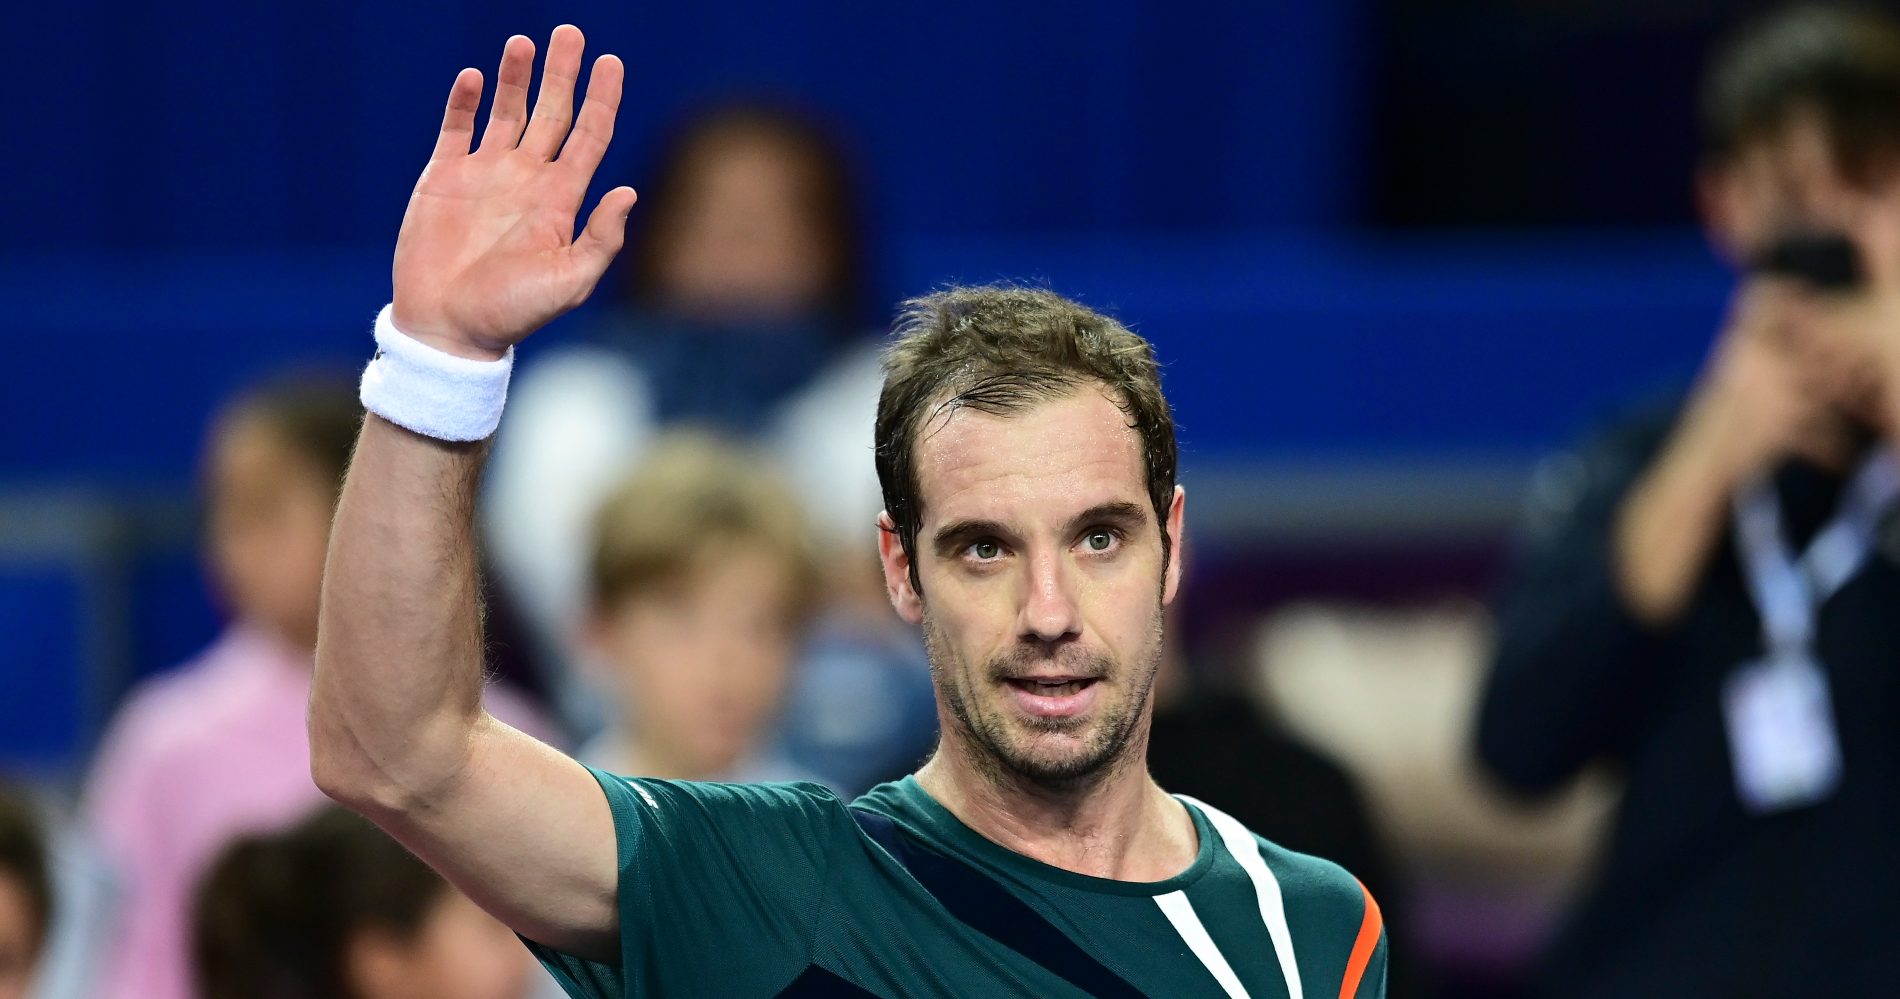 Richard Gasquet will be the third French player to participate in the UTS.